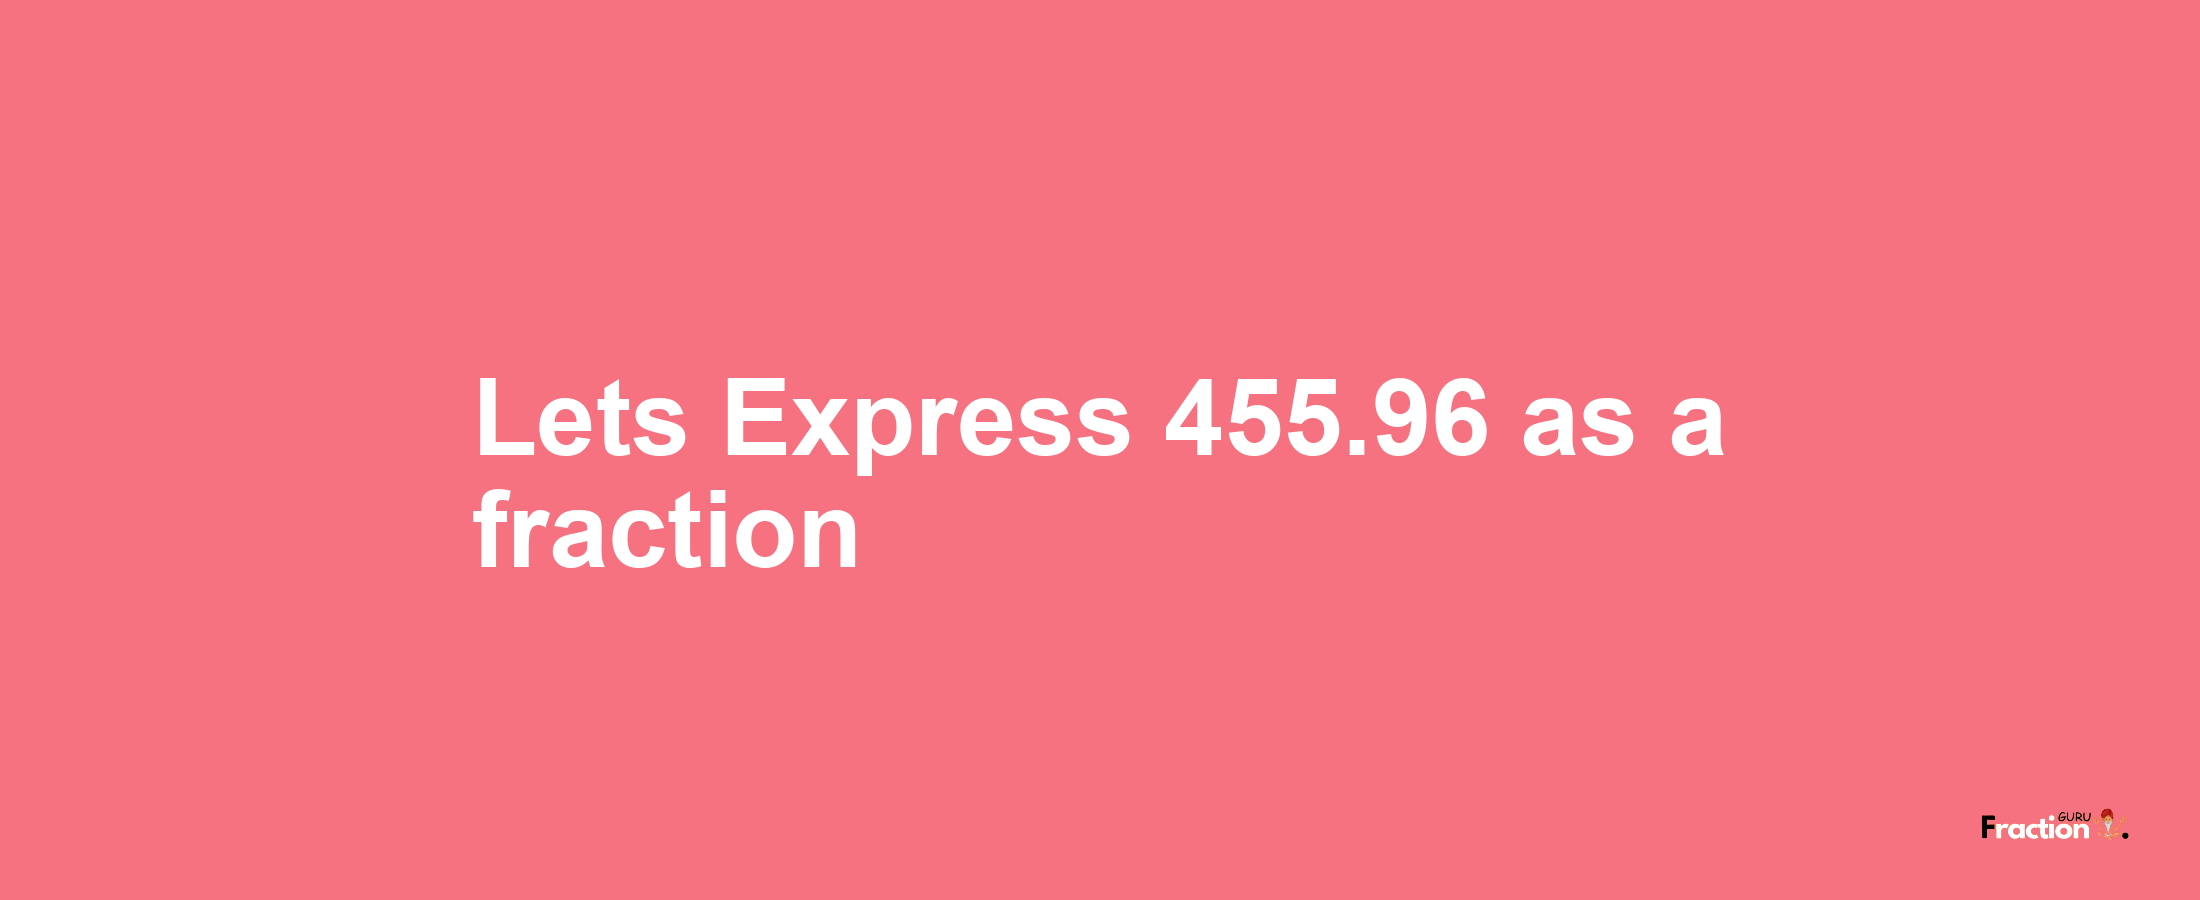 Lets Express 455.96 as afraction